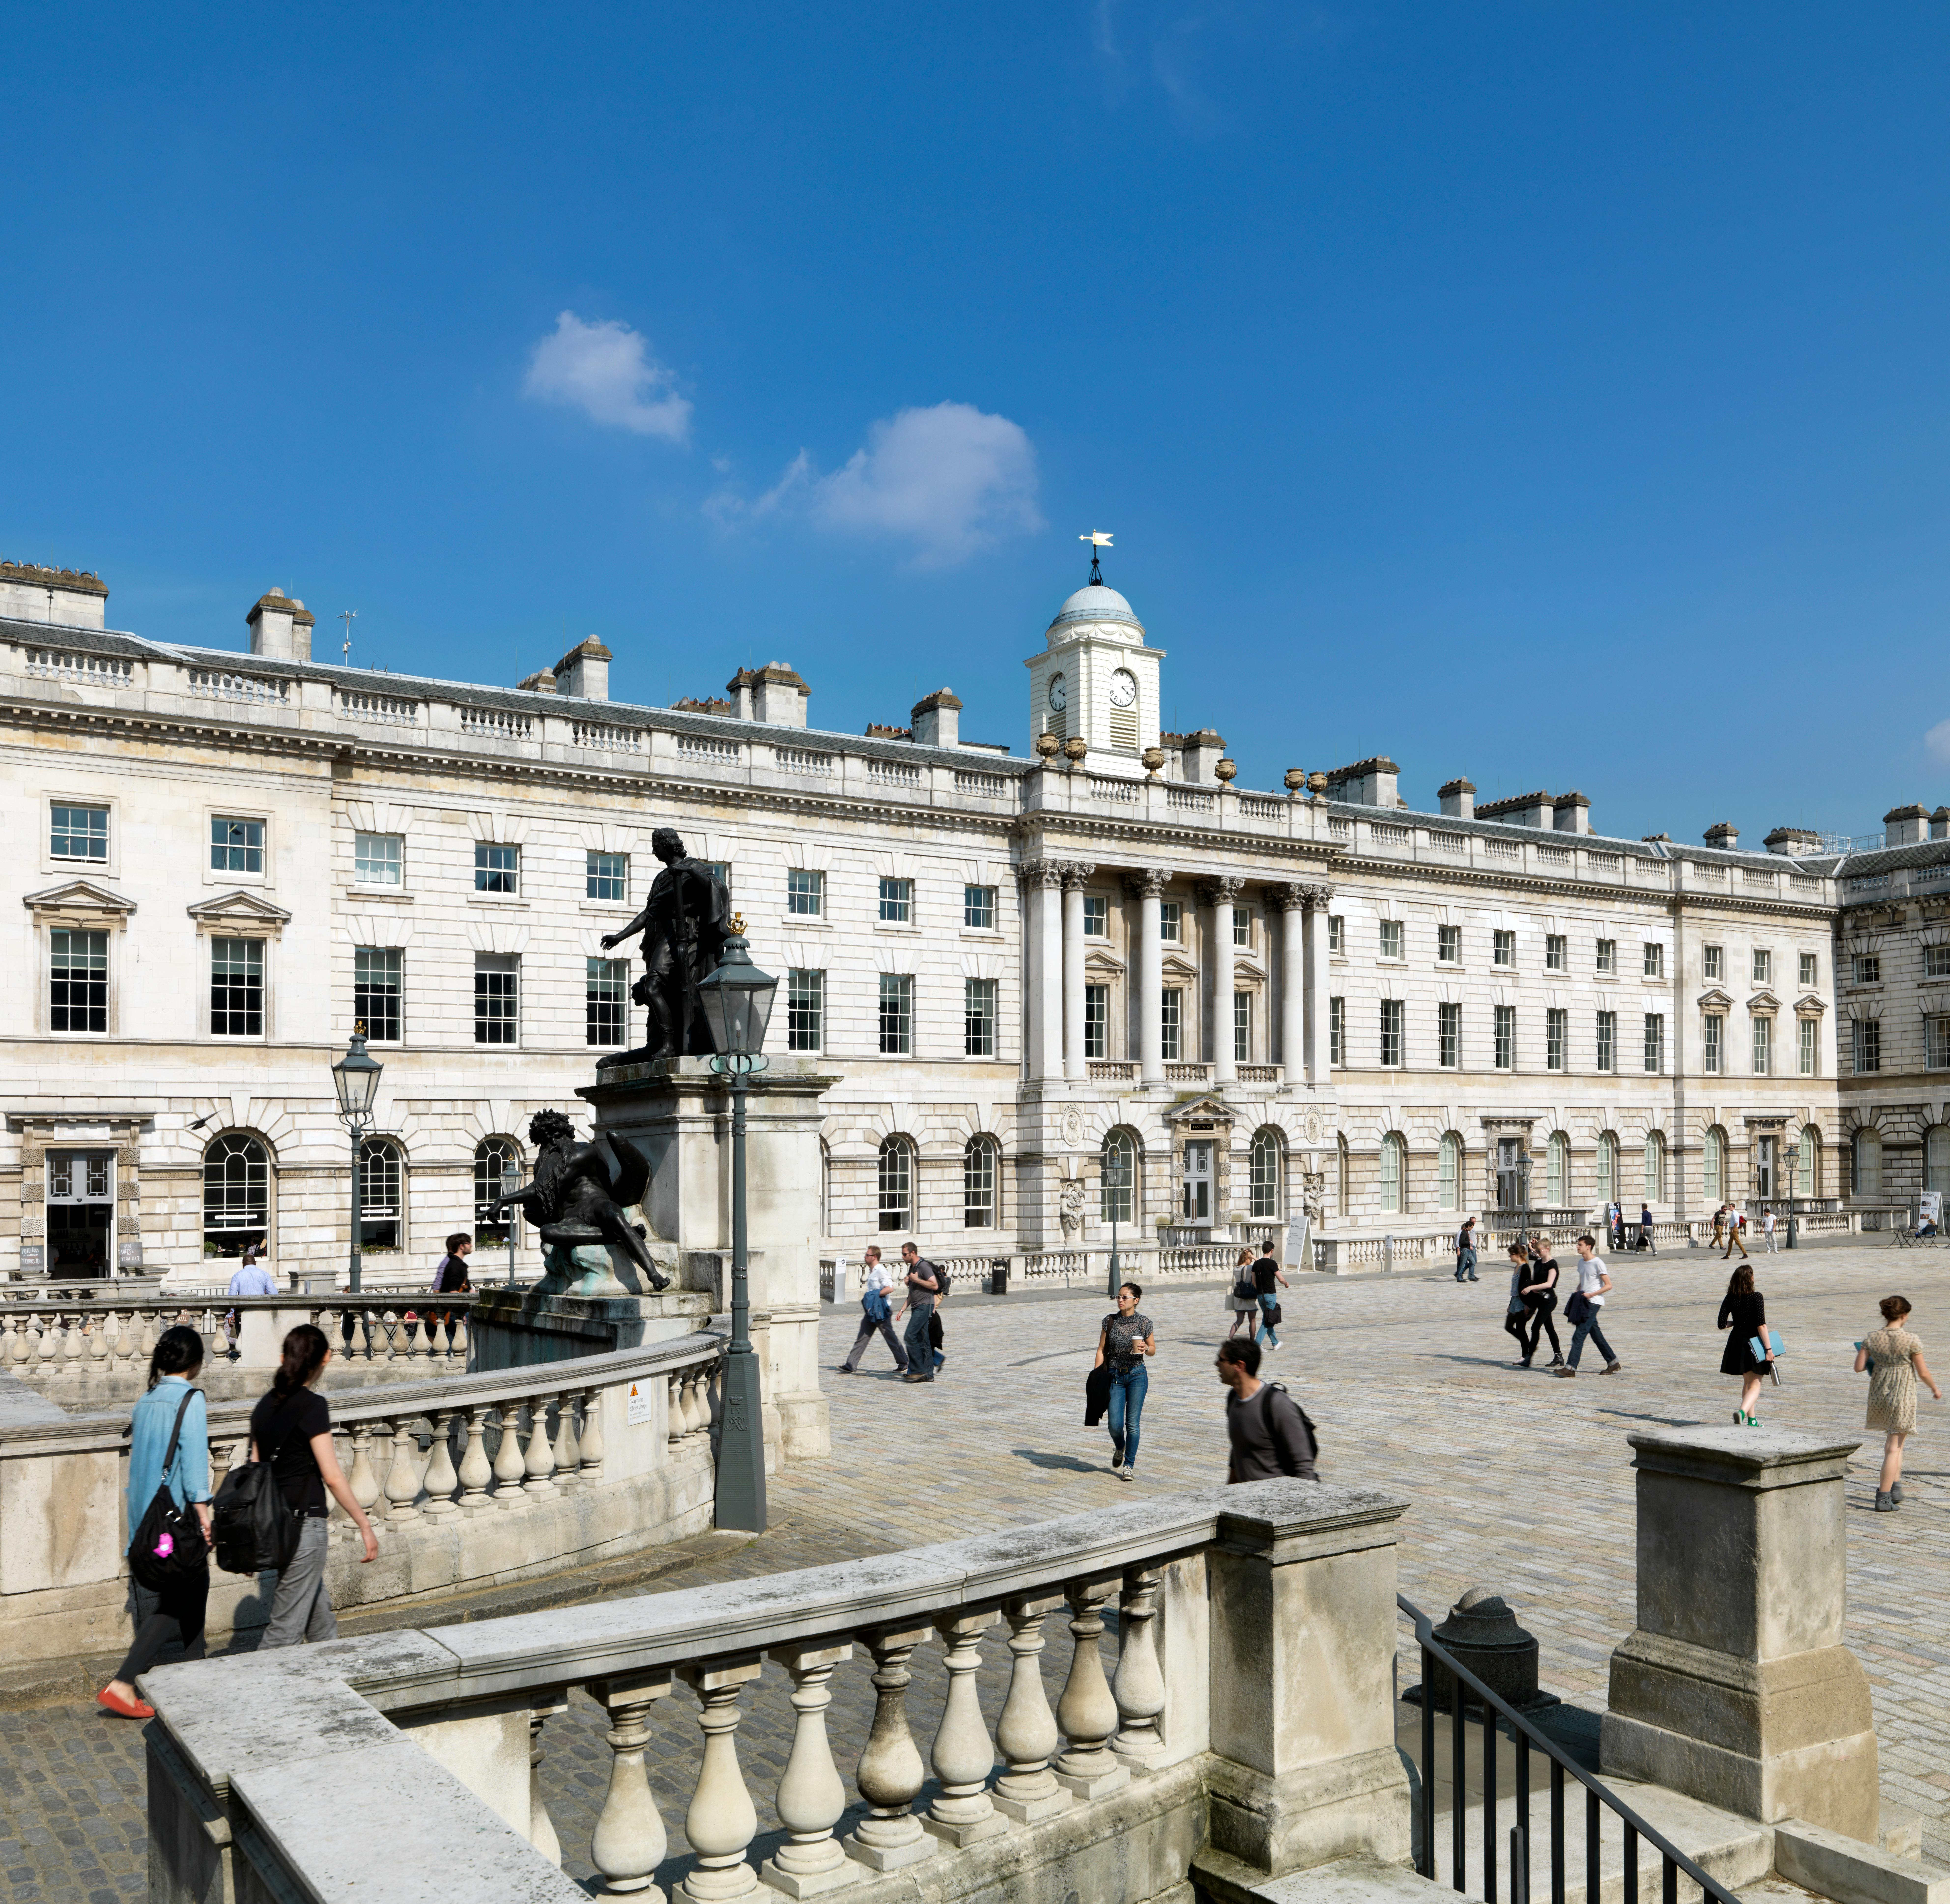 King's College London Free English Online Course - Opportunity Forum